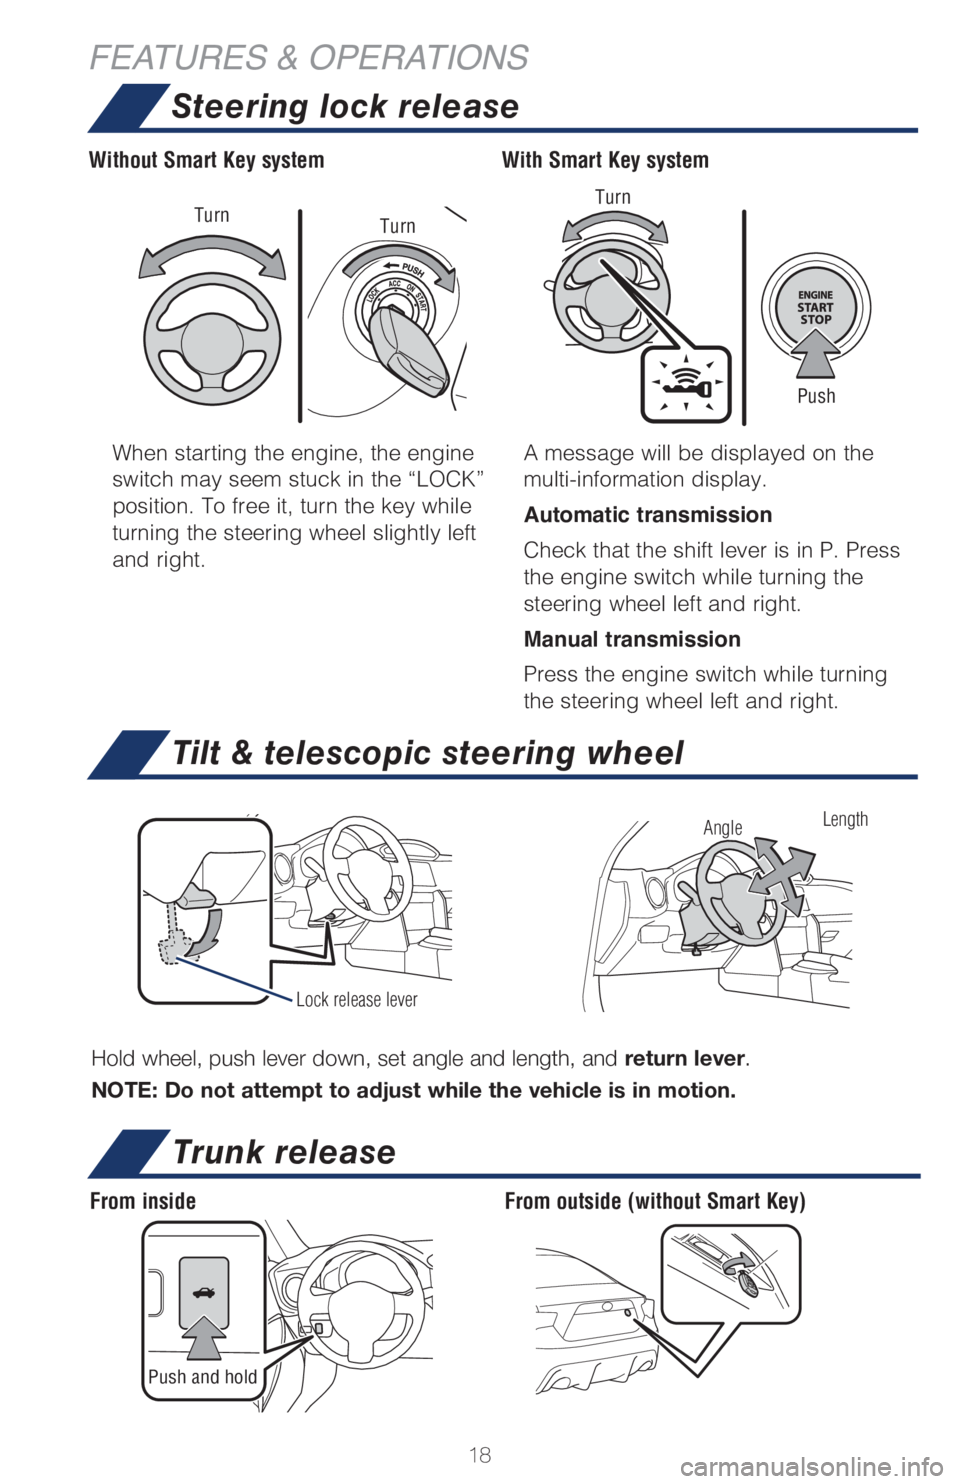 TOYOTA GT86 2019  Owners Manual (in English) 18
FEATURES & OPERATIONS
Trunk release
Push and hold
From insideFrom outside (without Smart Key) When starting the engine, the engine 
switch may seem stuck in the “LOCK” 
position. To free it, tu